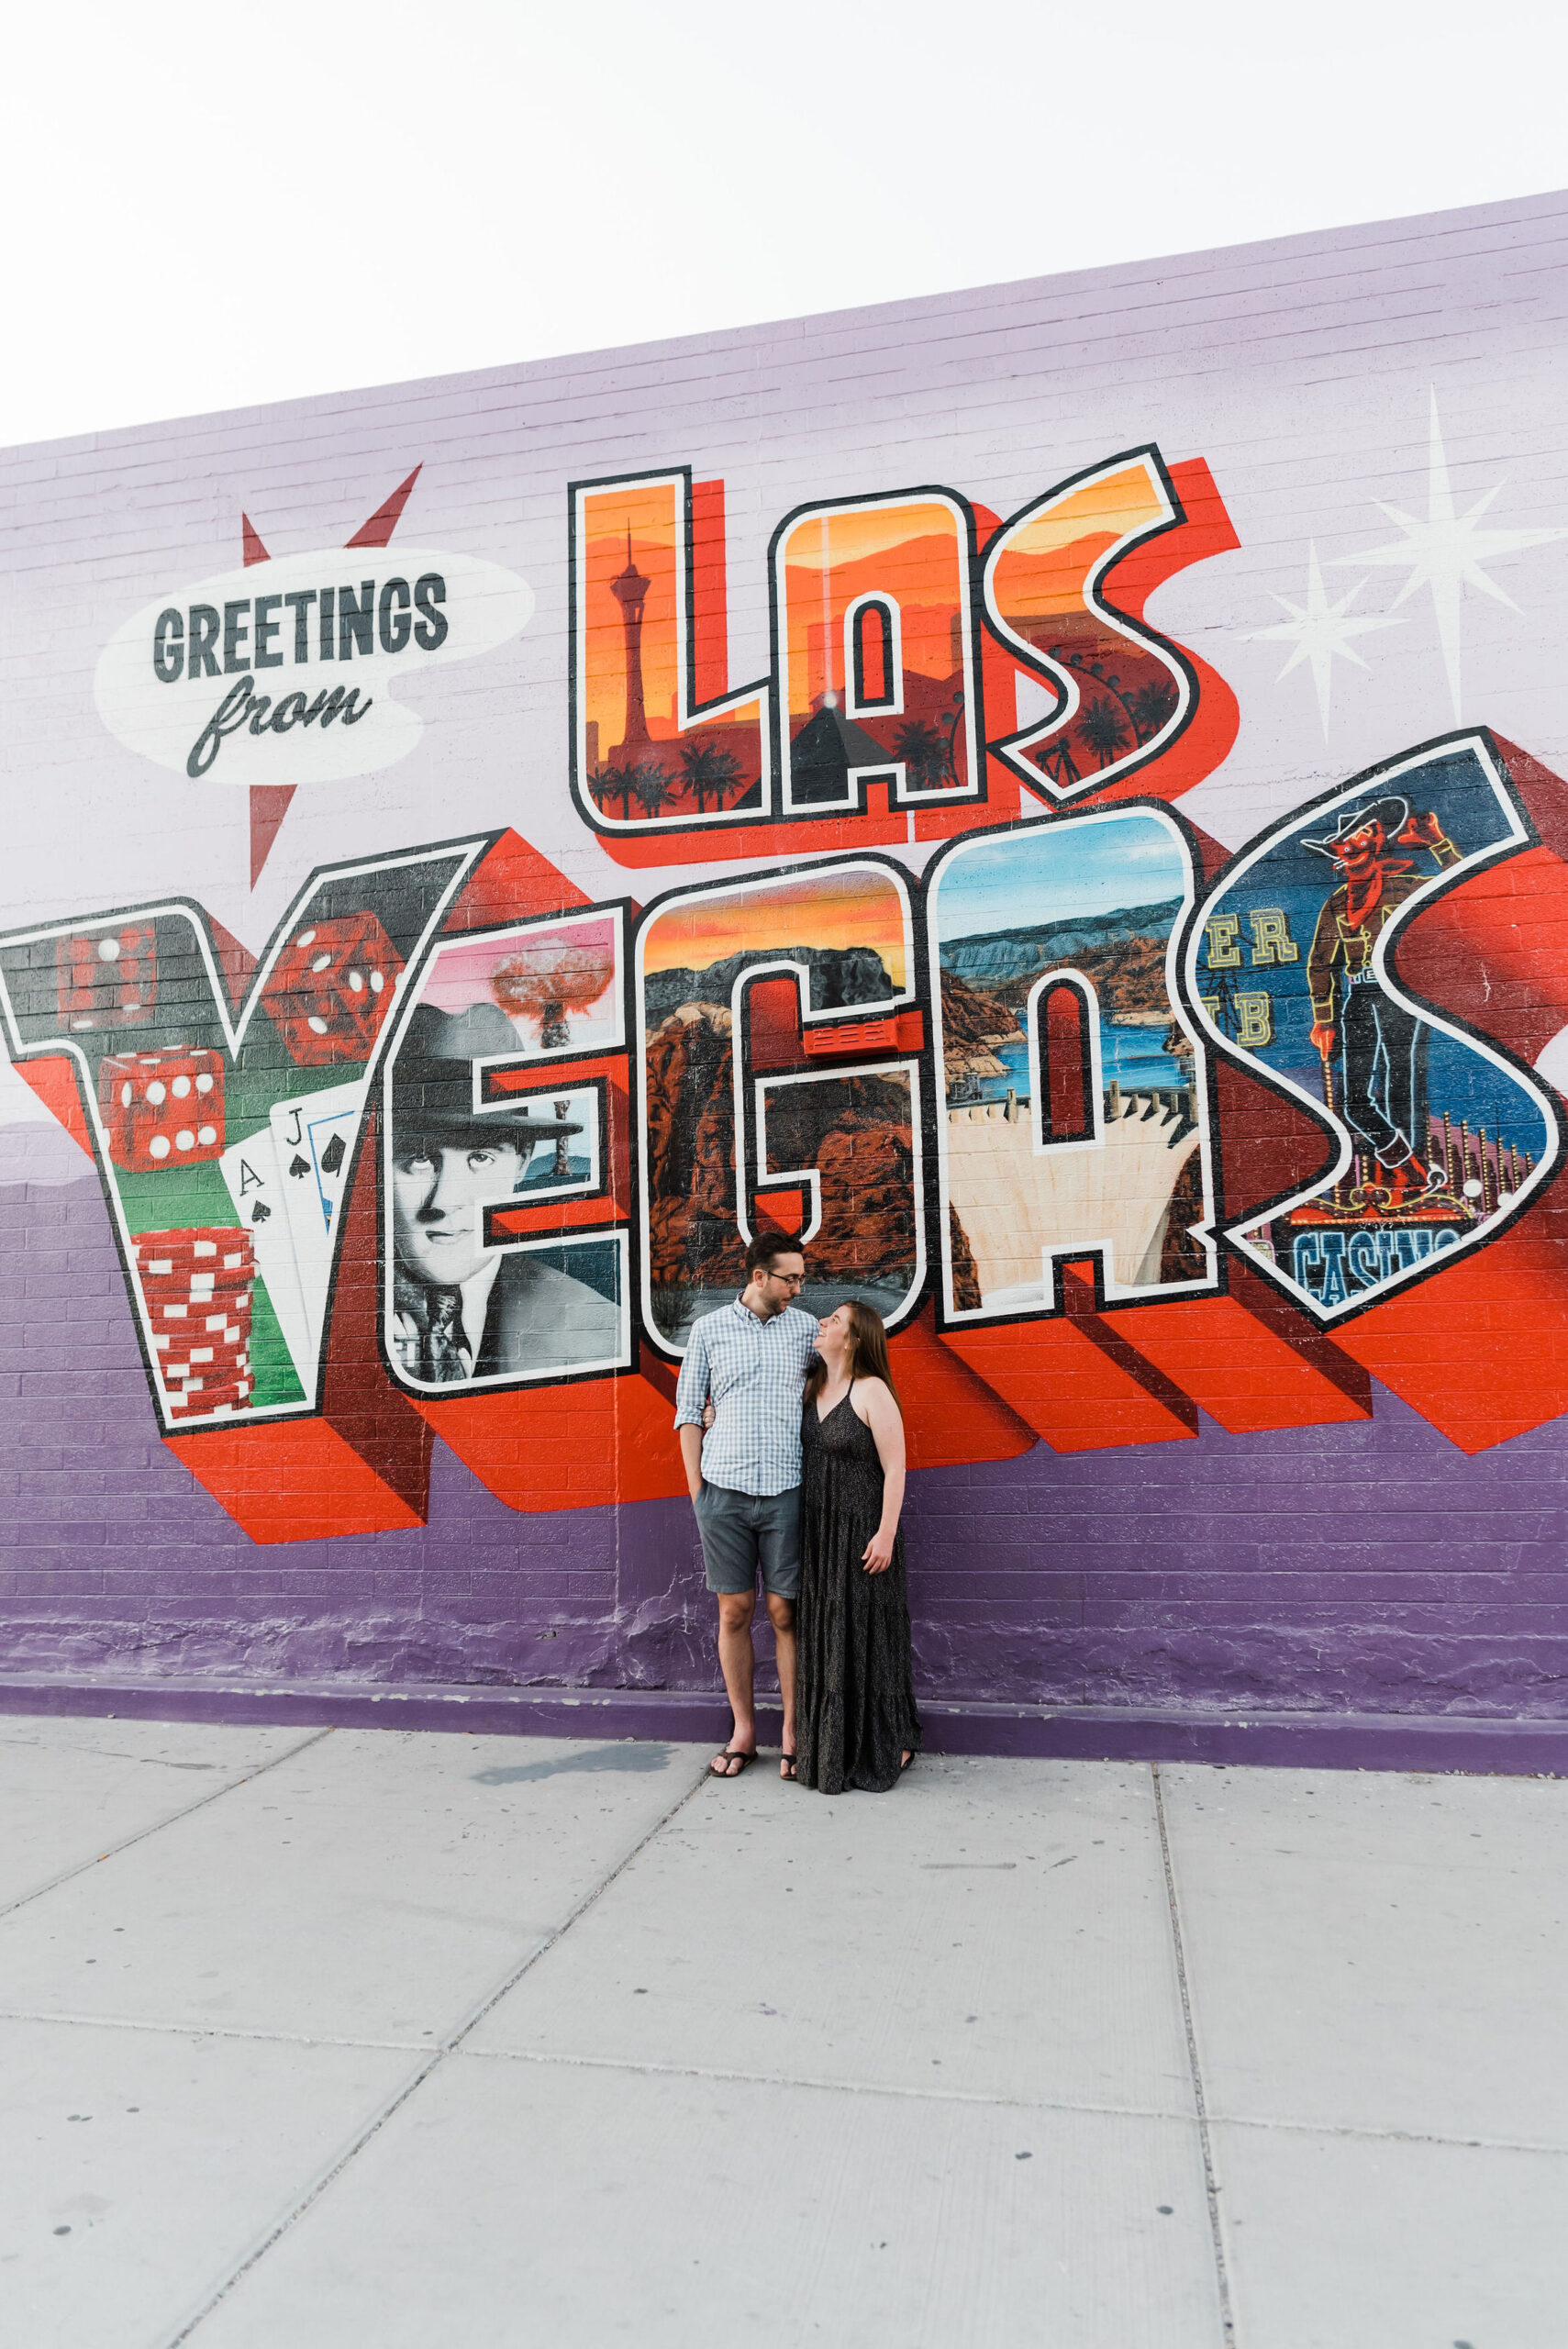 Las Vegas engagement photos of a couple with their arms around each other smiling while standing in front of a large mural that reads "Greeting from Las Vegas".